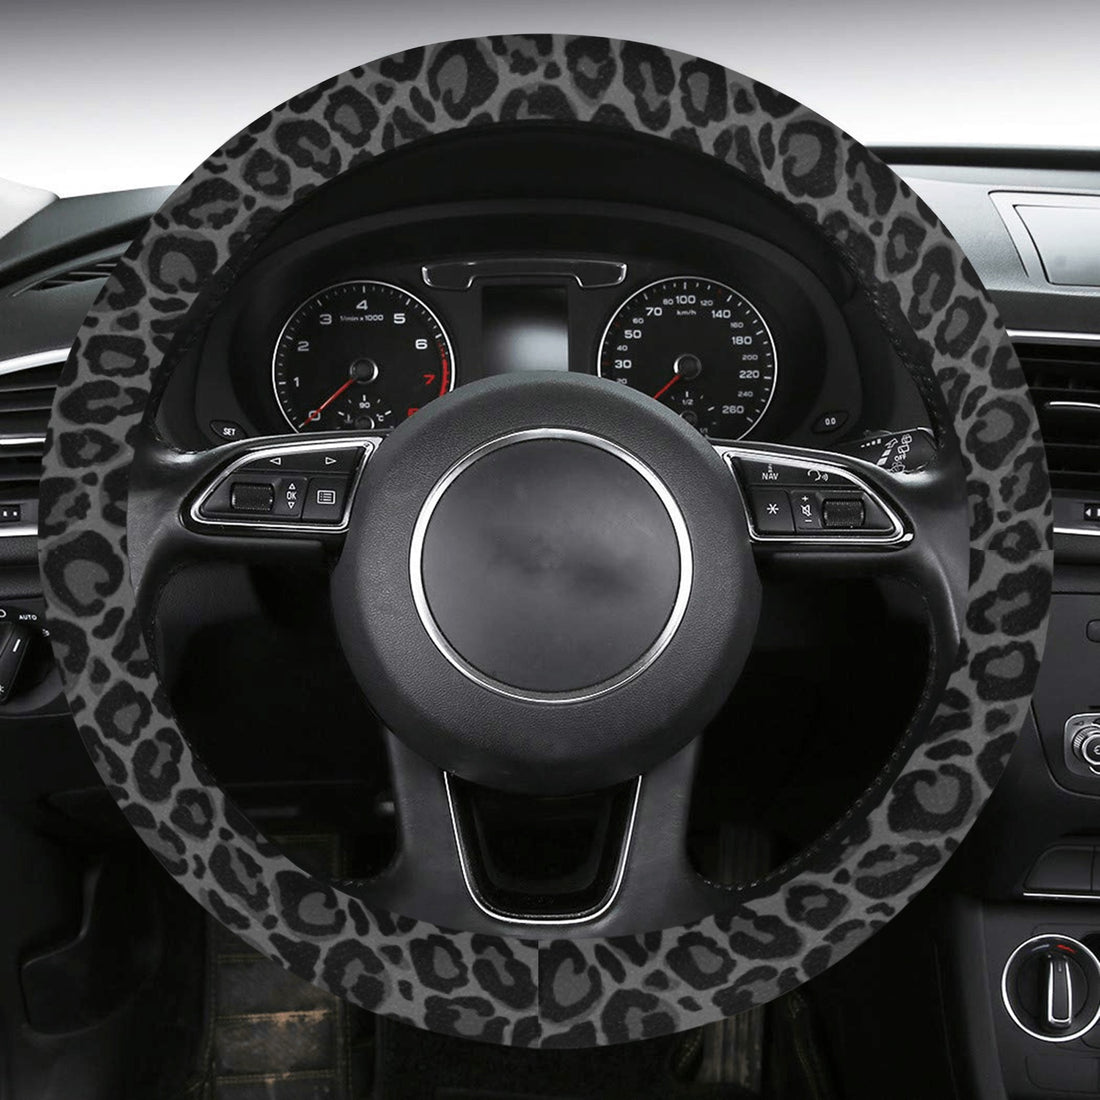 Are steering wheel covers a good idea?